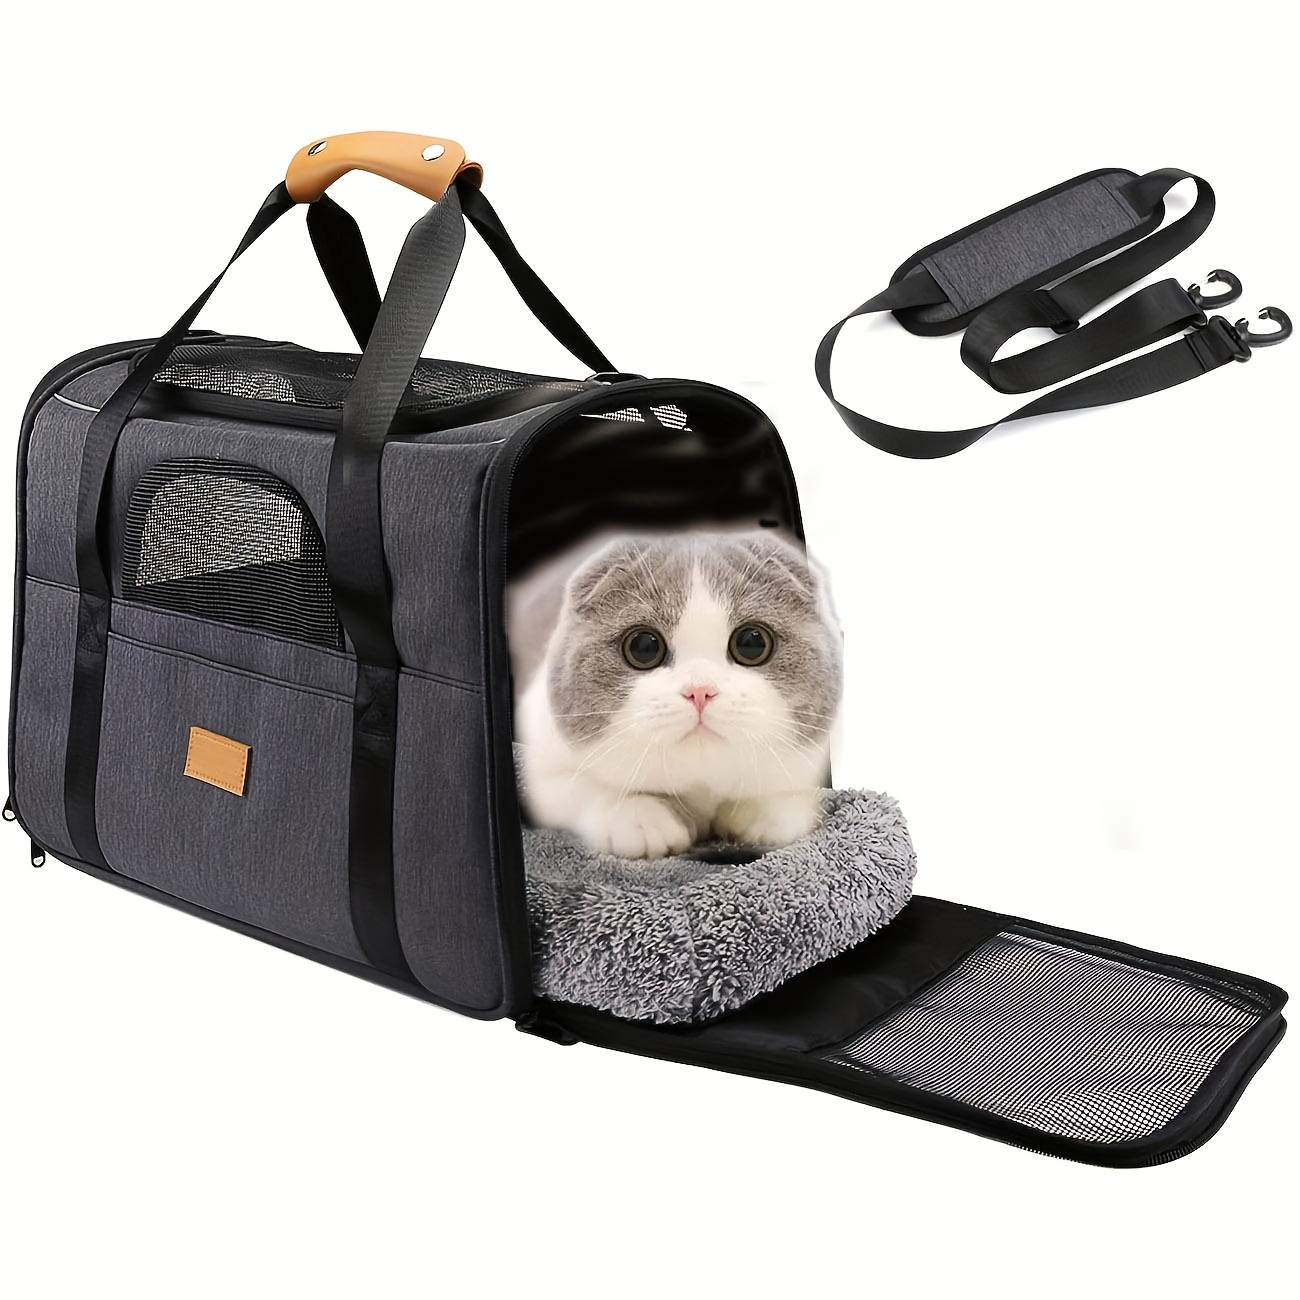 High Quality Cat Carrier With Wheels Travel For Cats Foldable Pet